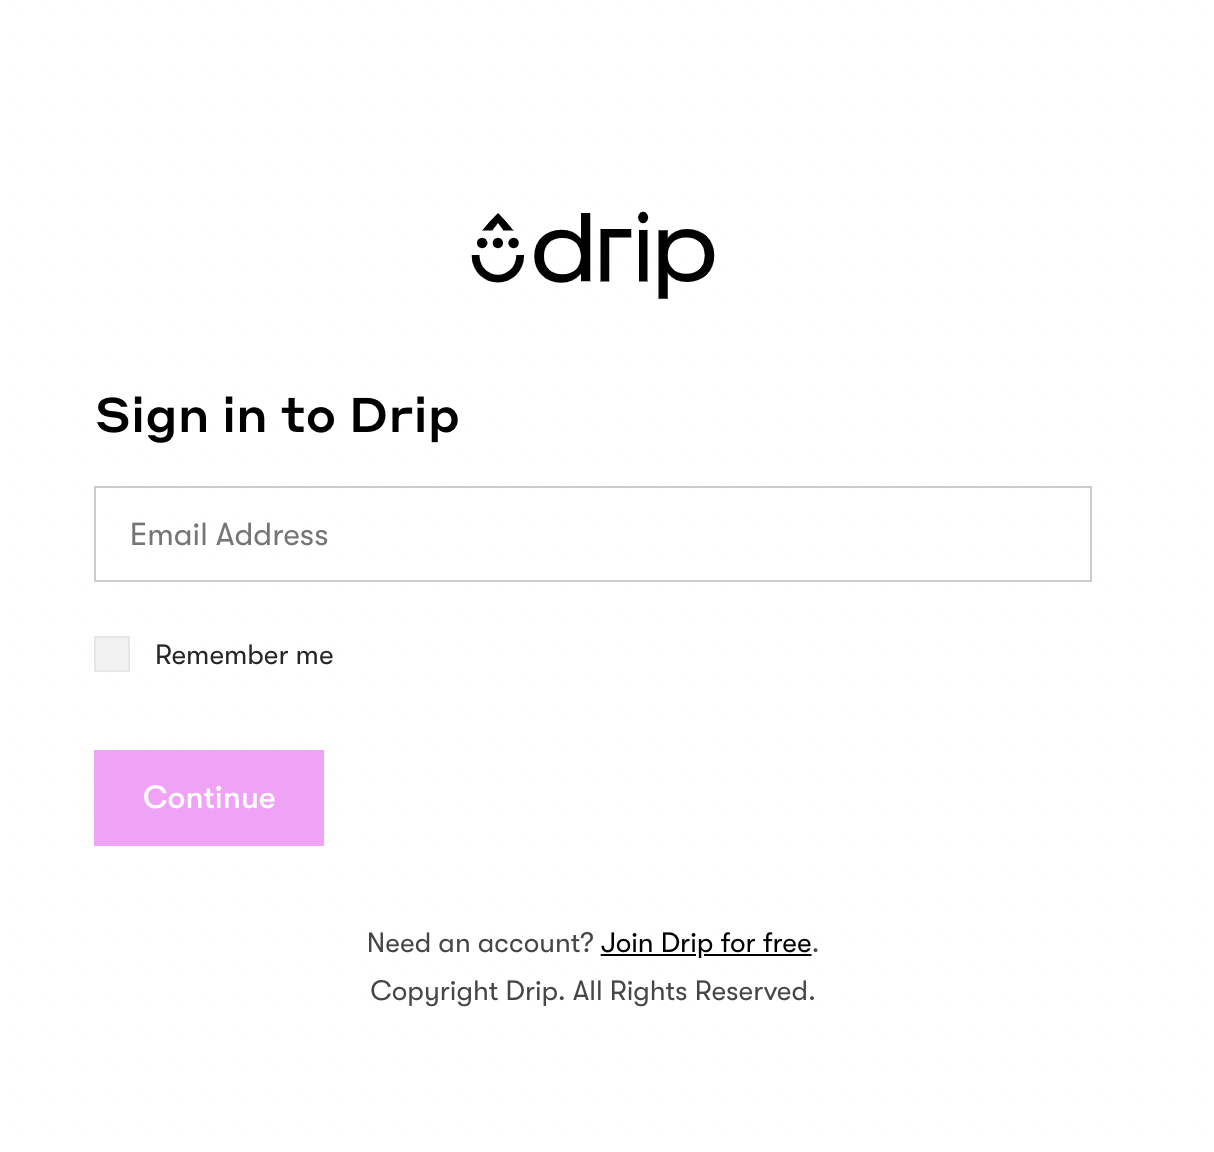 drip_3.png